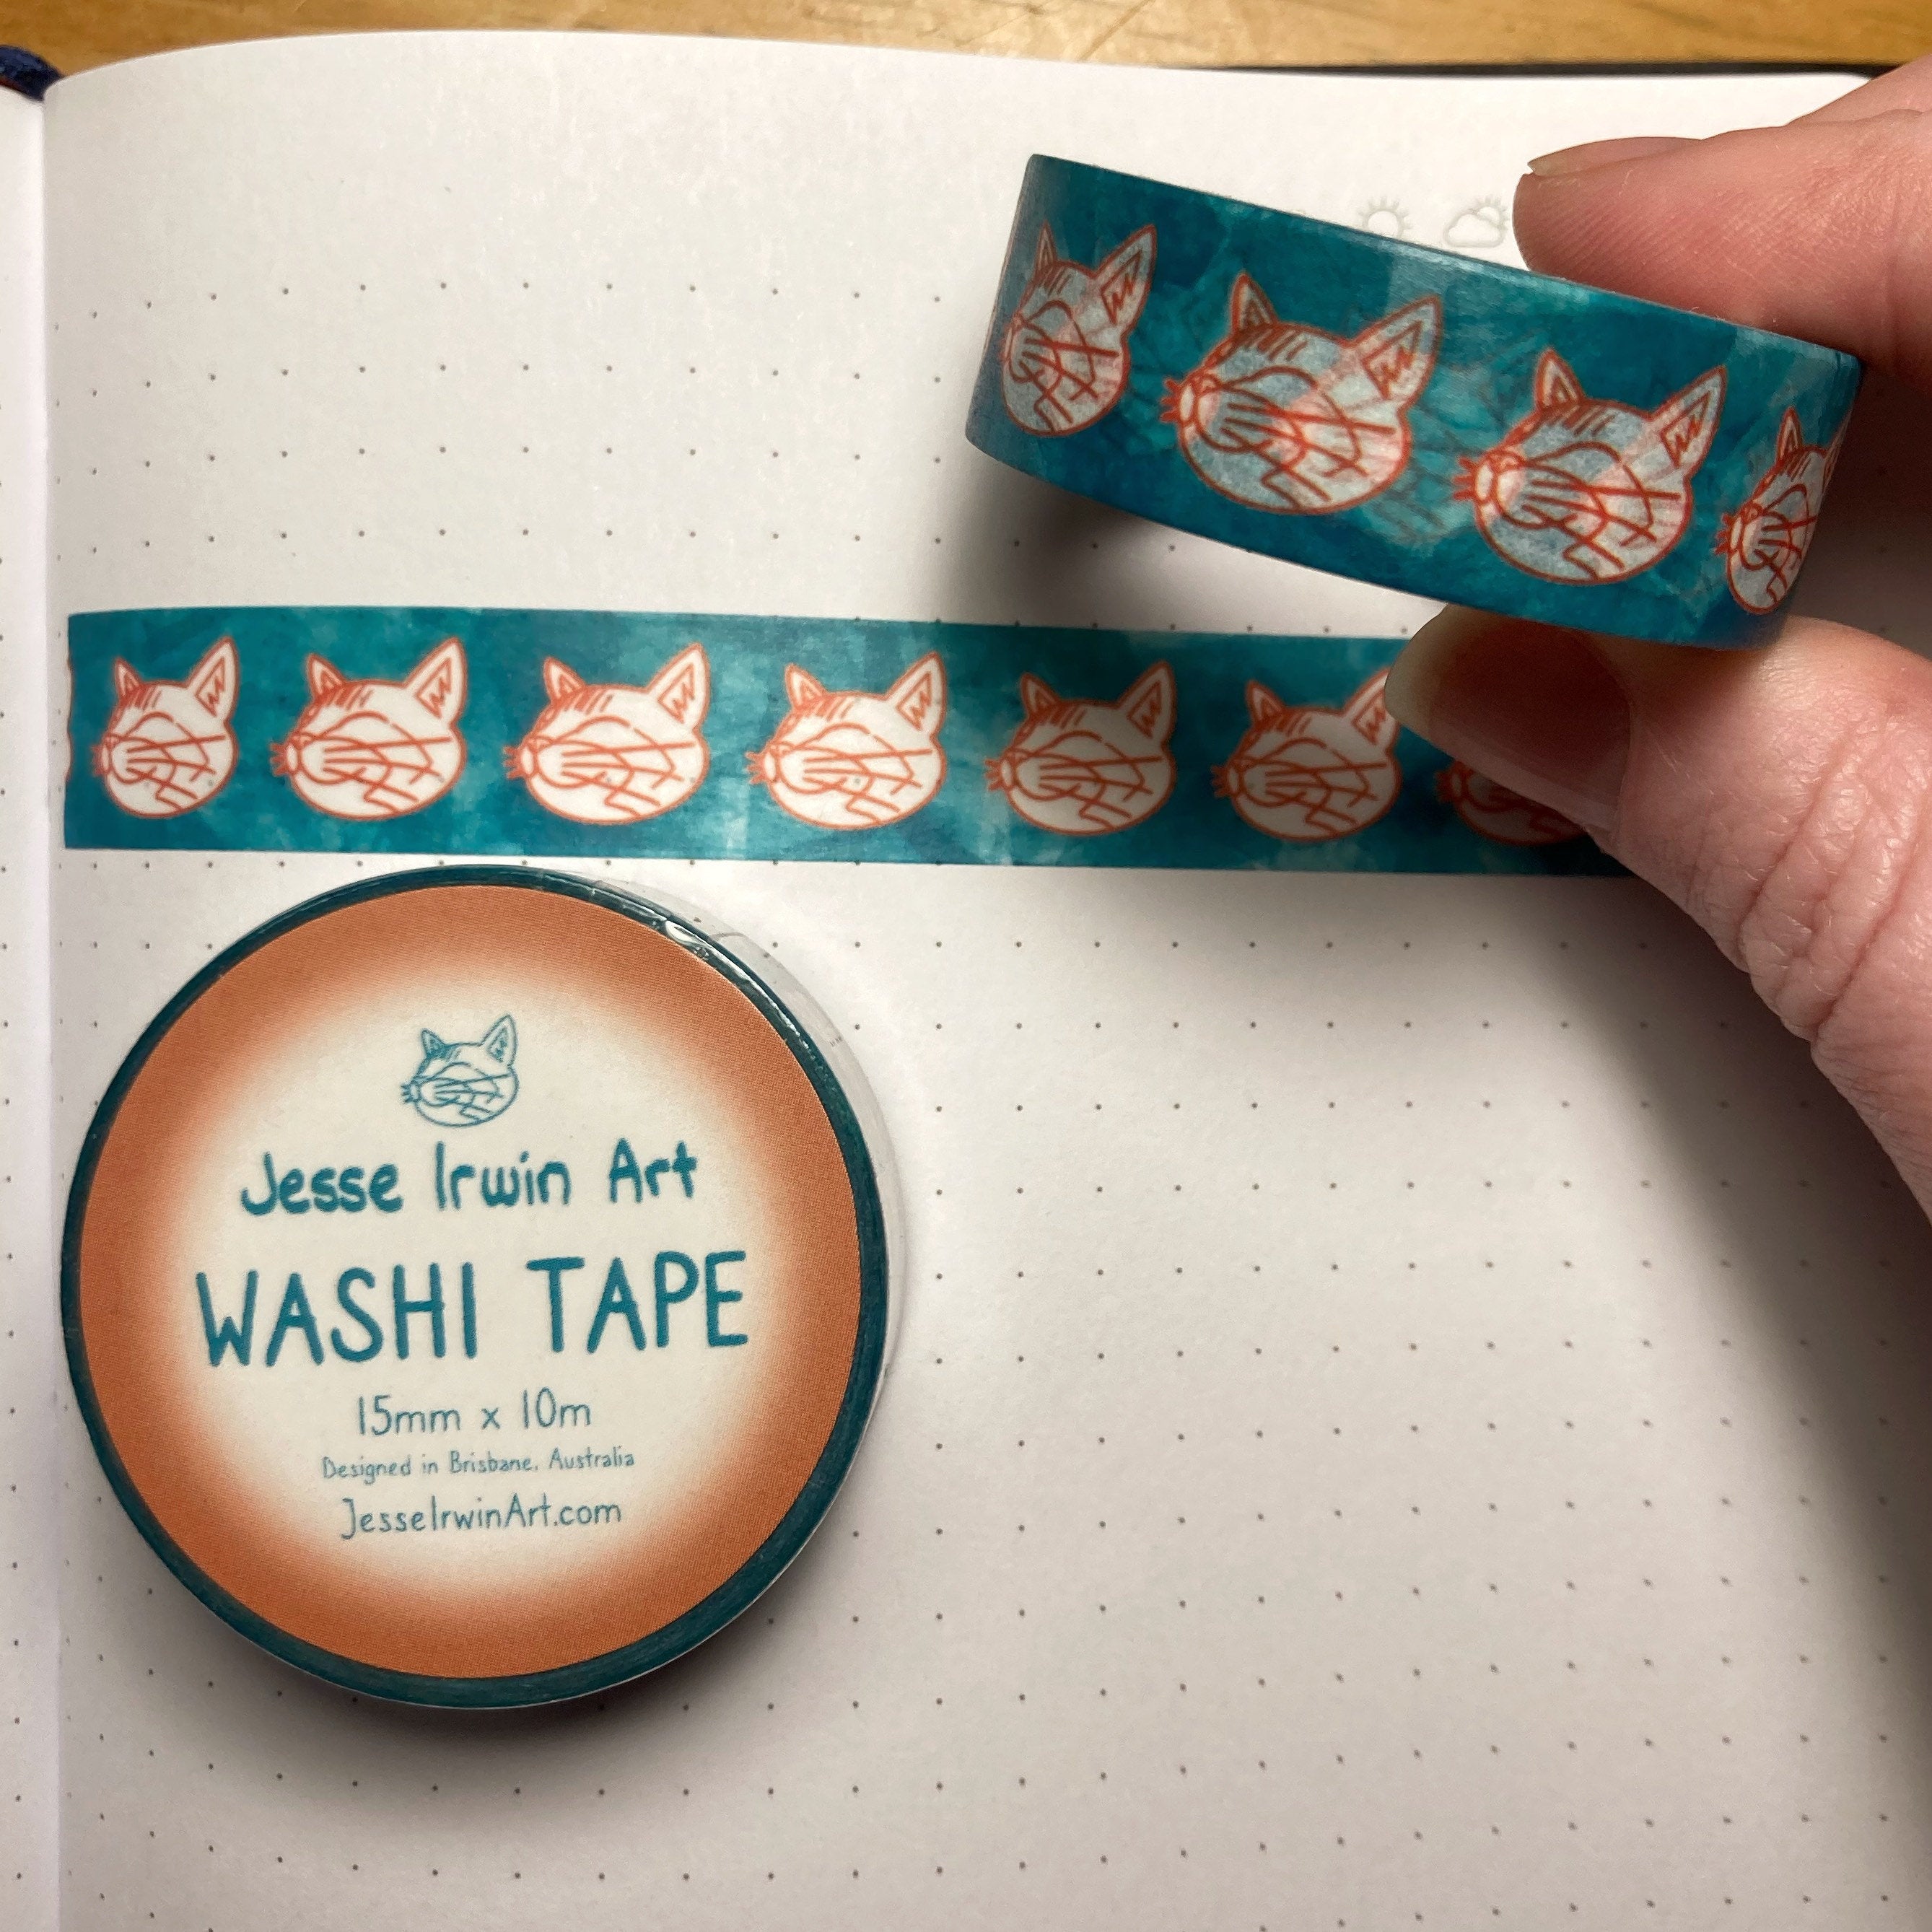 Crystal Cats Washi Tape - 15mm x 10m - Decorative Planner Tape